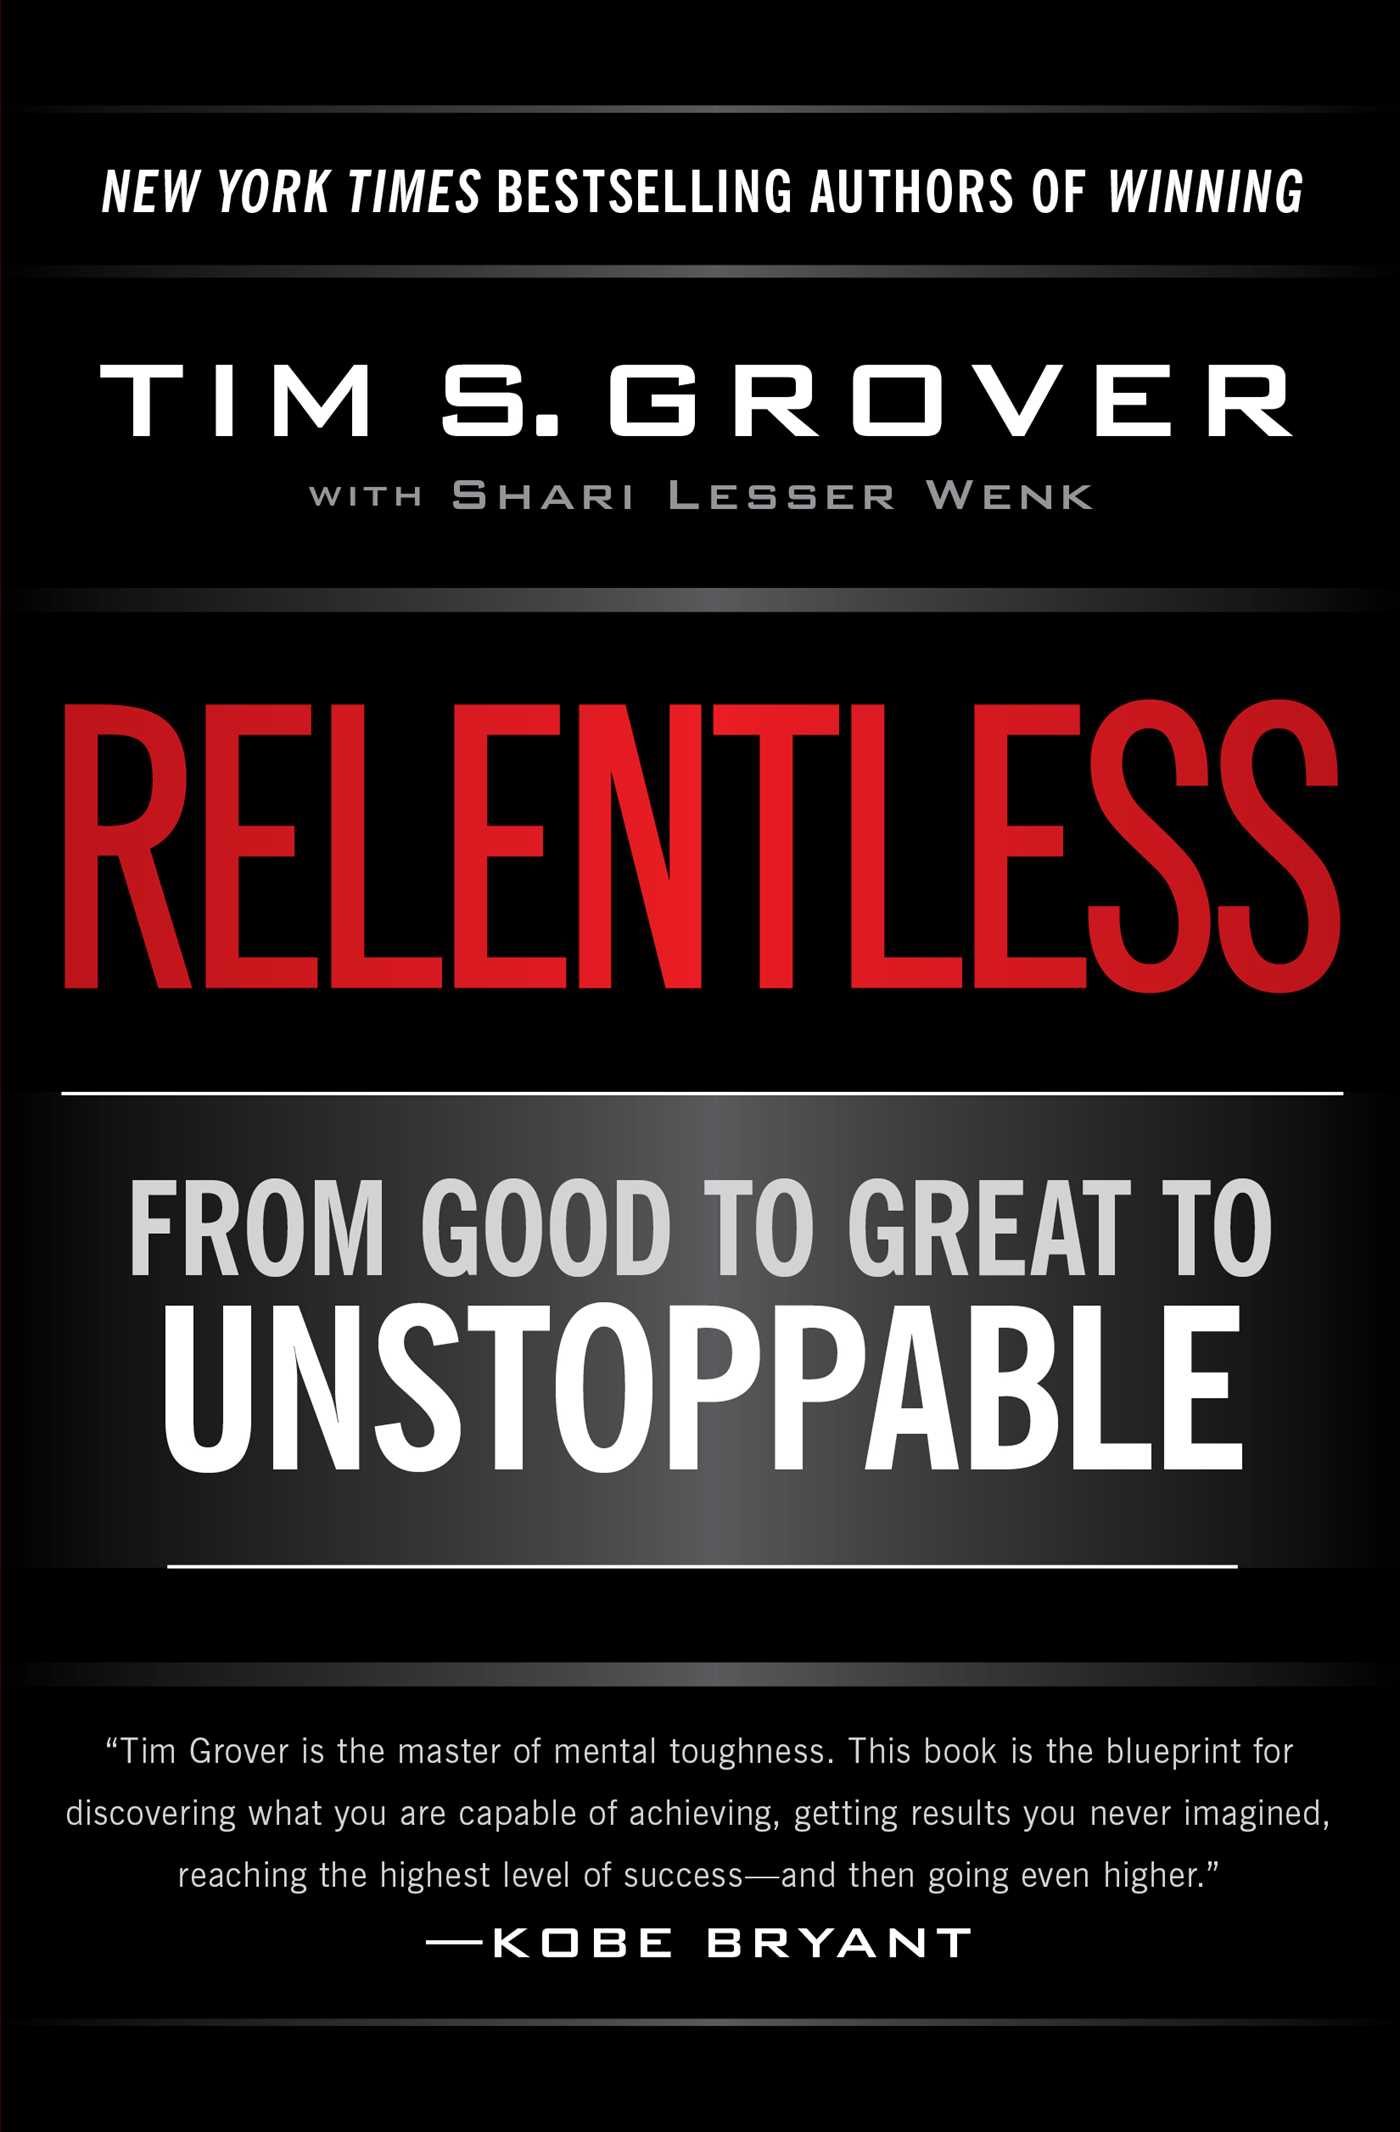 Relentless from good to great to unstoppable